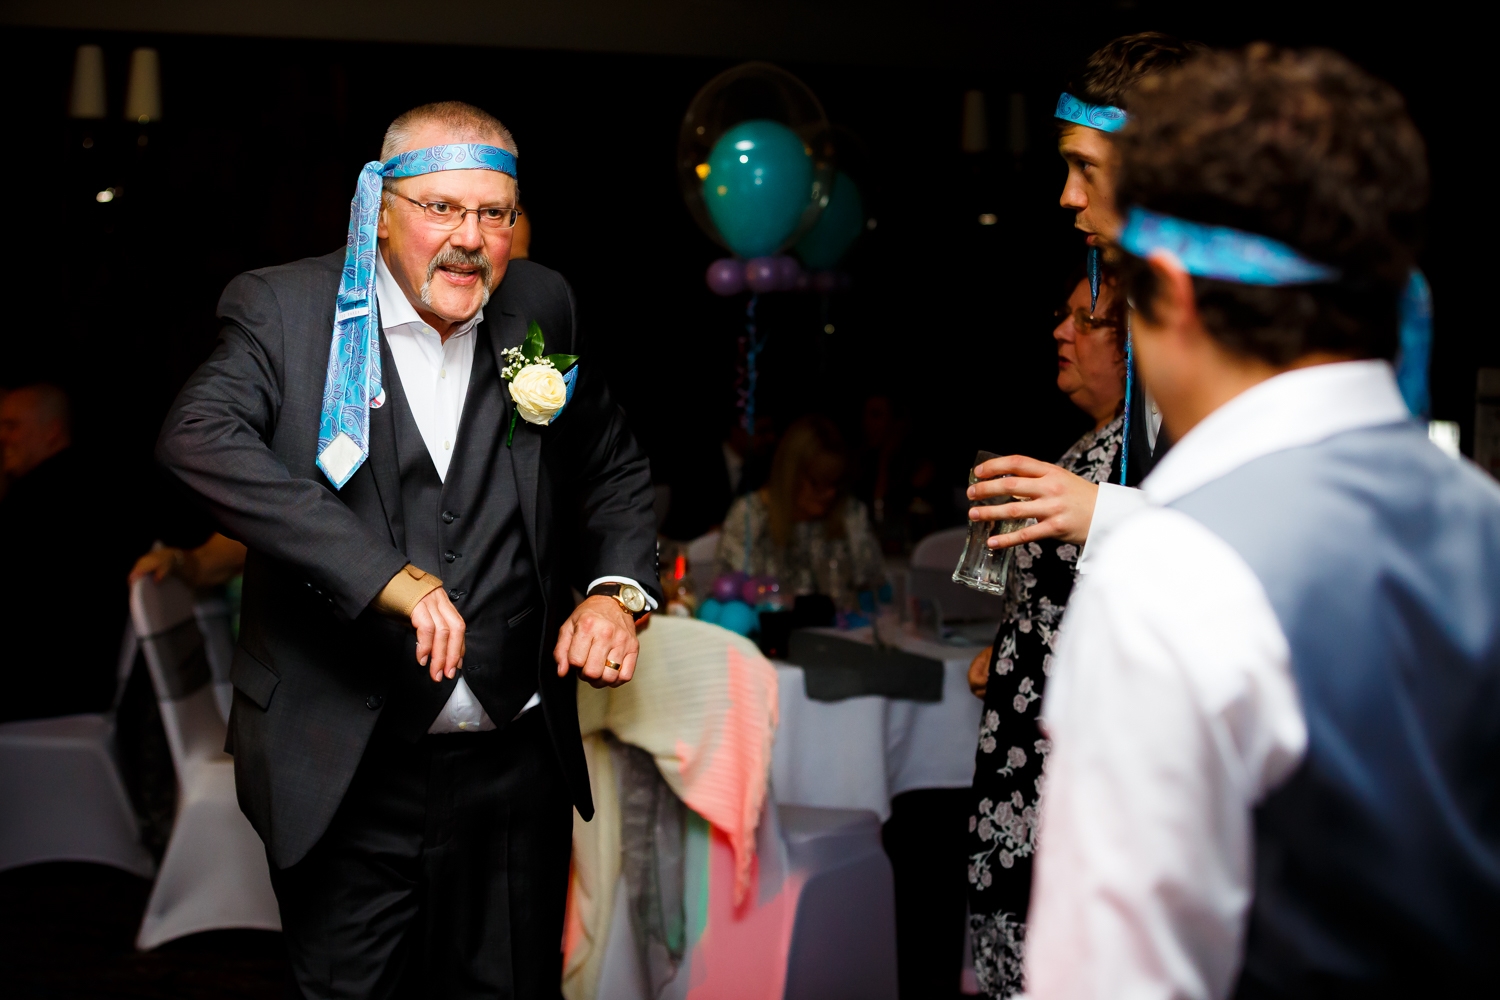 Grooms dad dancing with a tie around his head